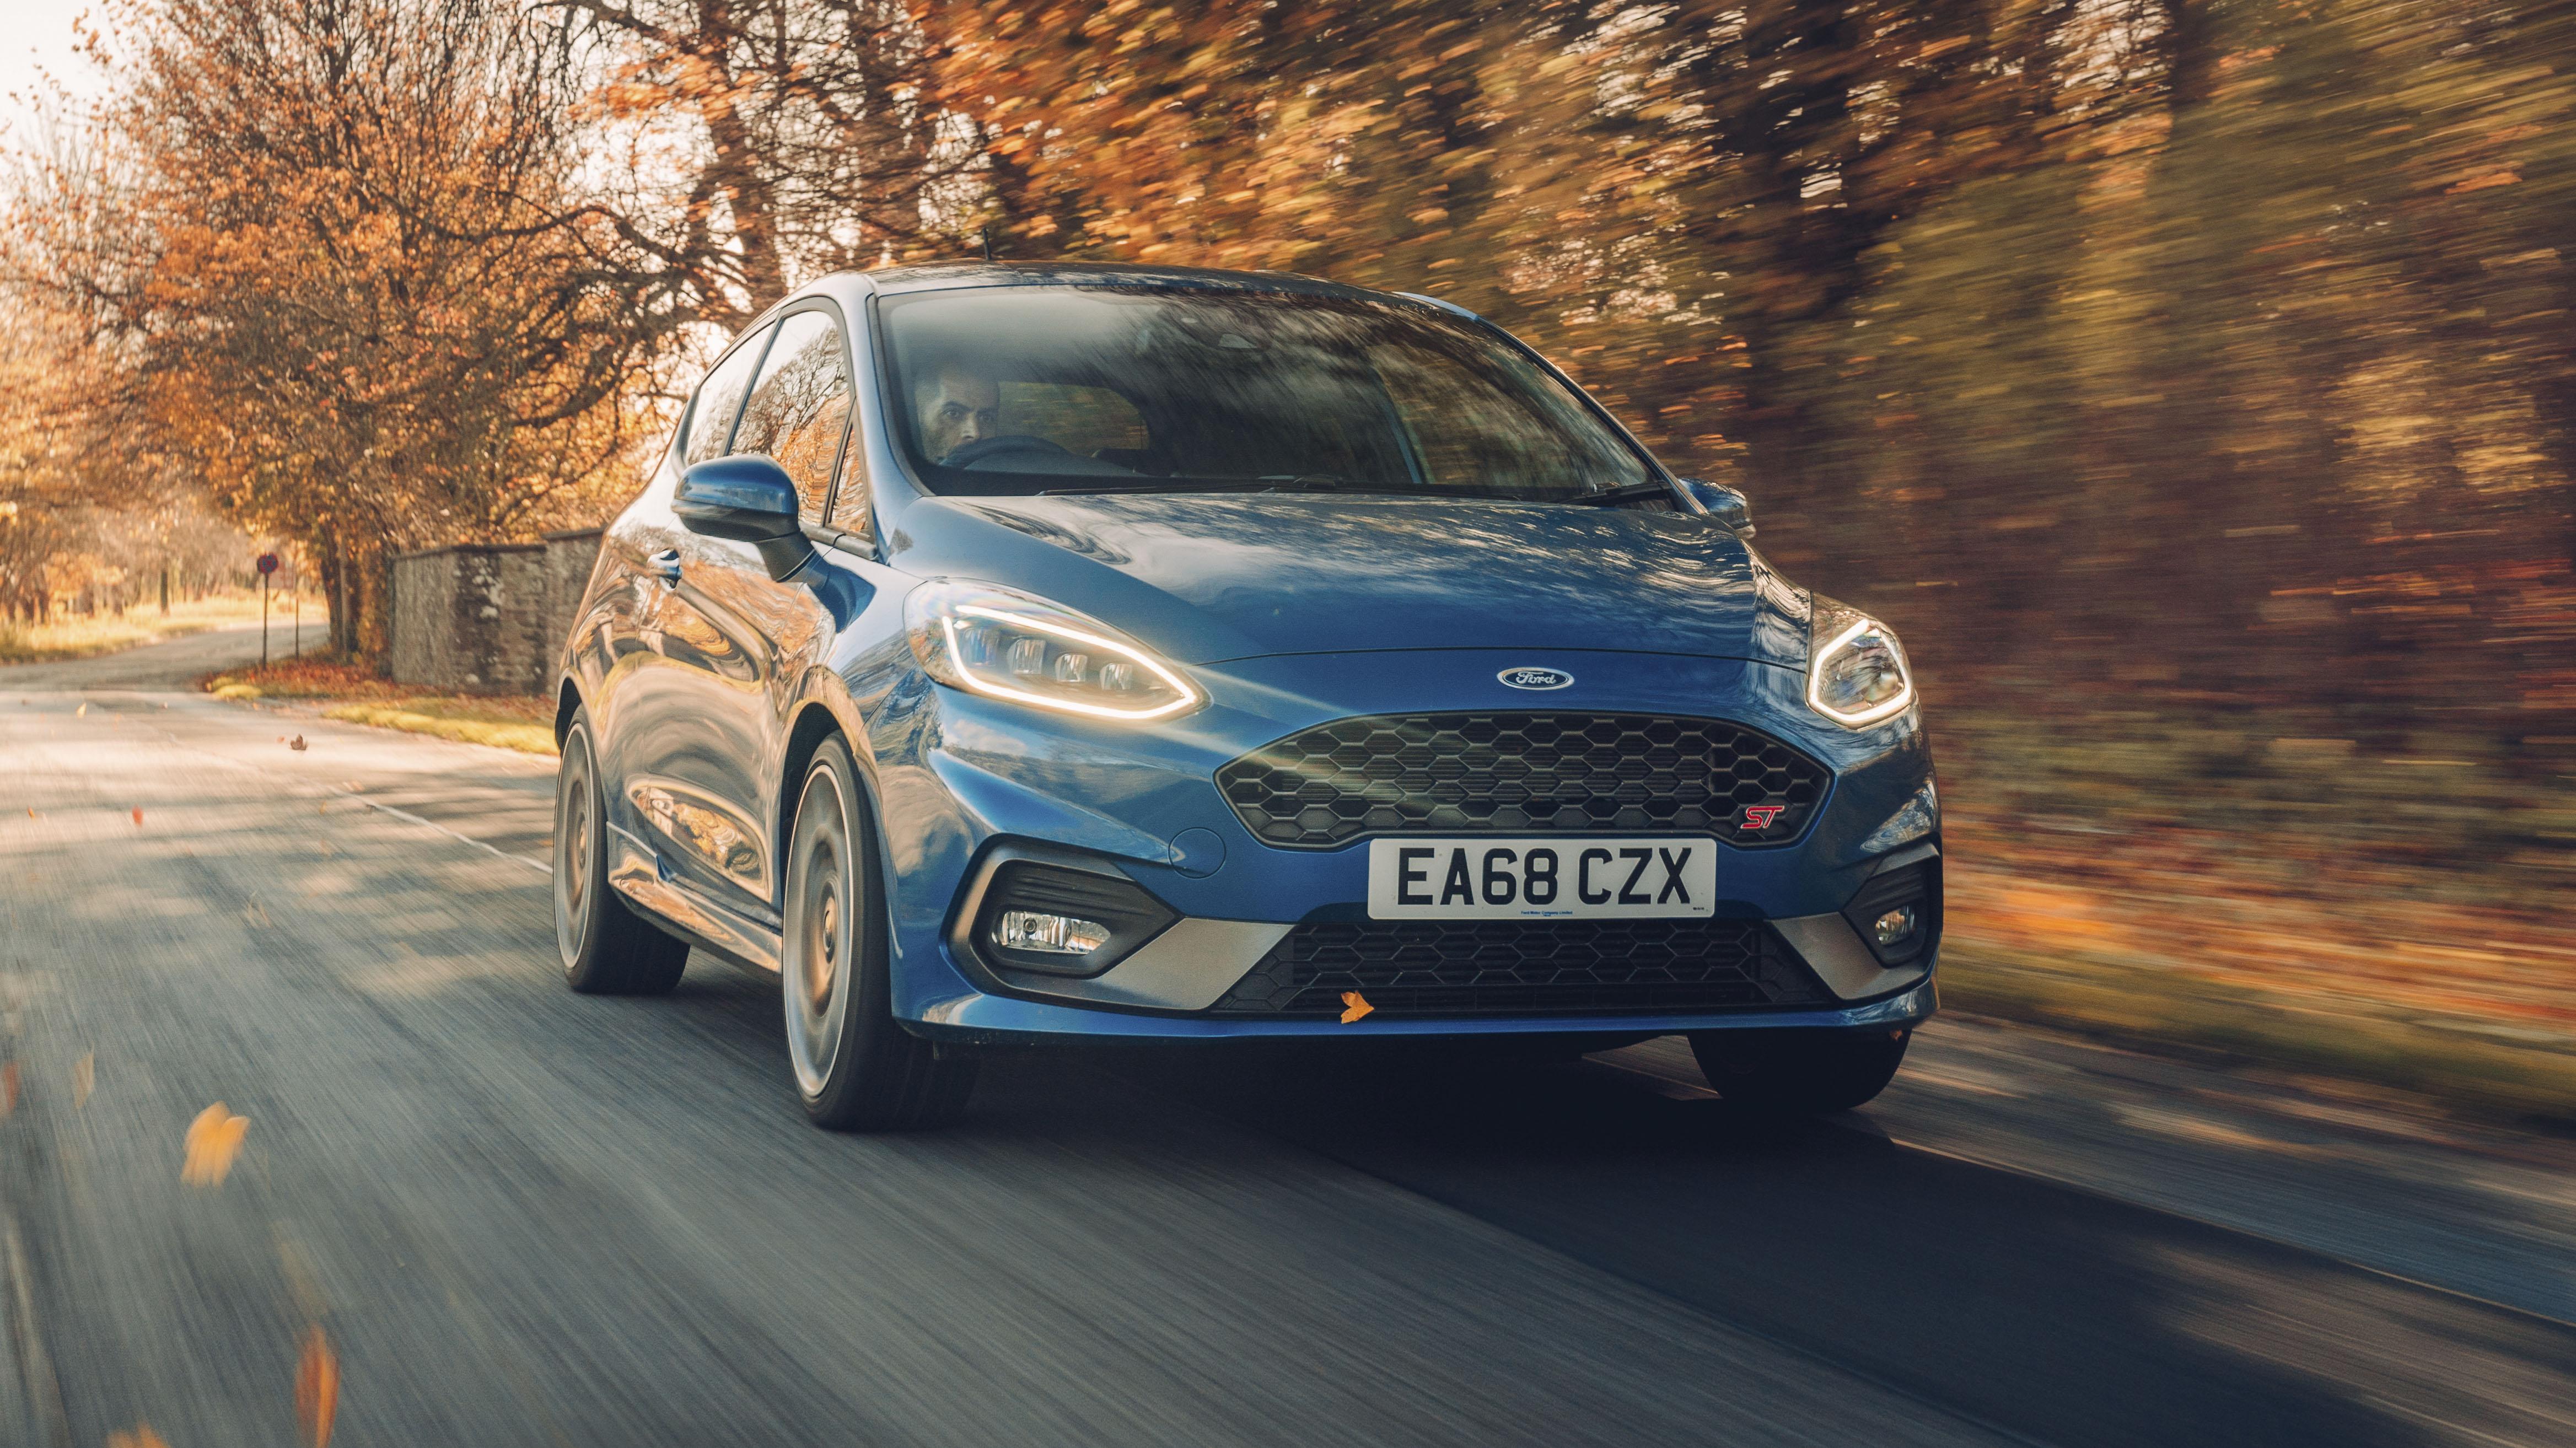 TG mags Car of the Year the Ford Fiesta ST Top Gear